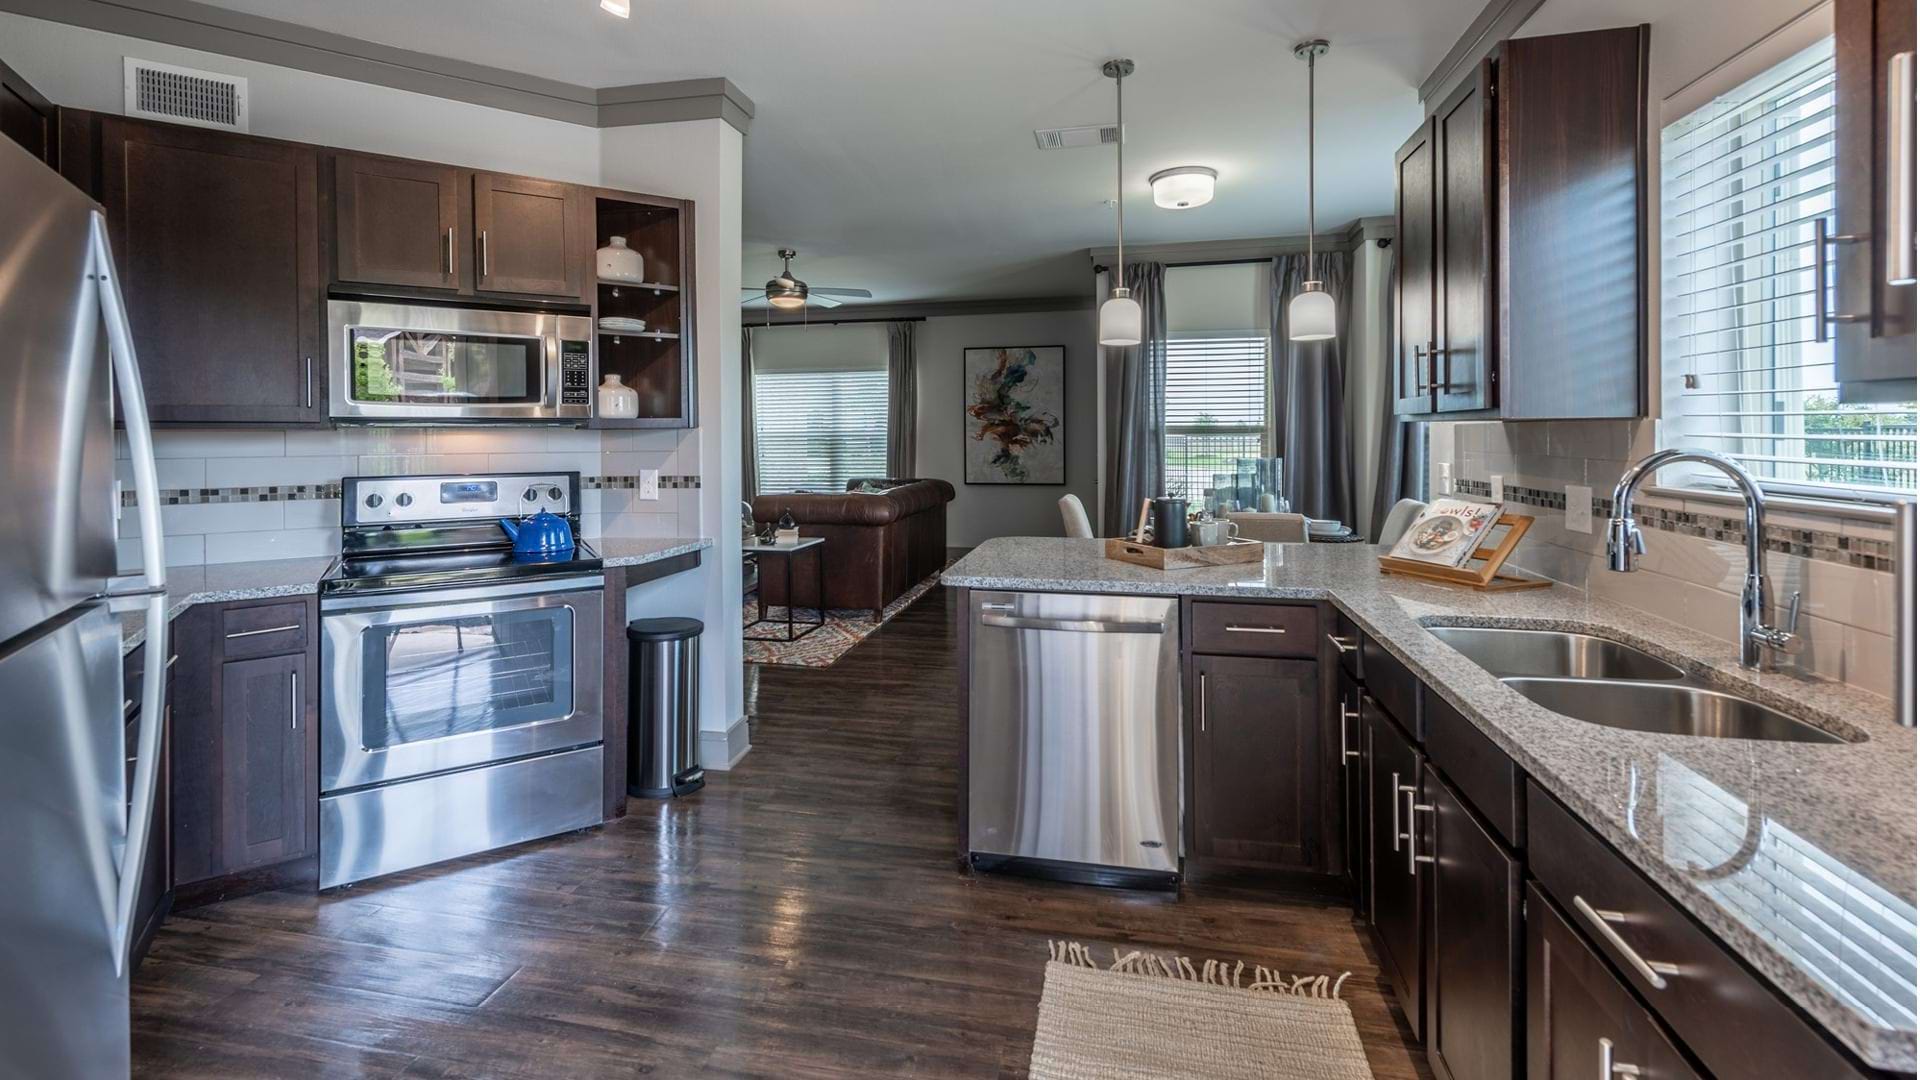 Spacious kitchen with modern lighting at our luxury apartments in Prosper, TX